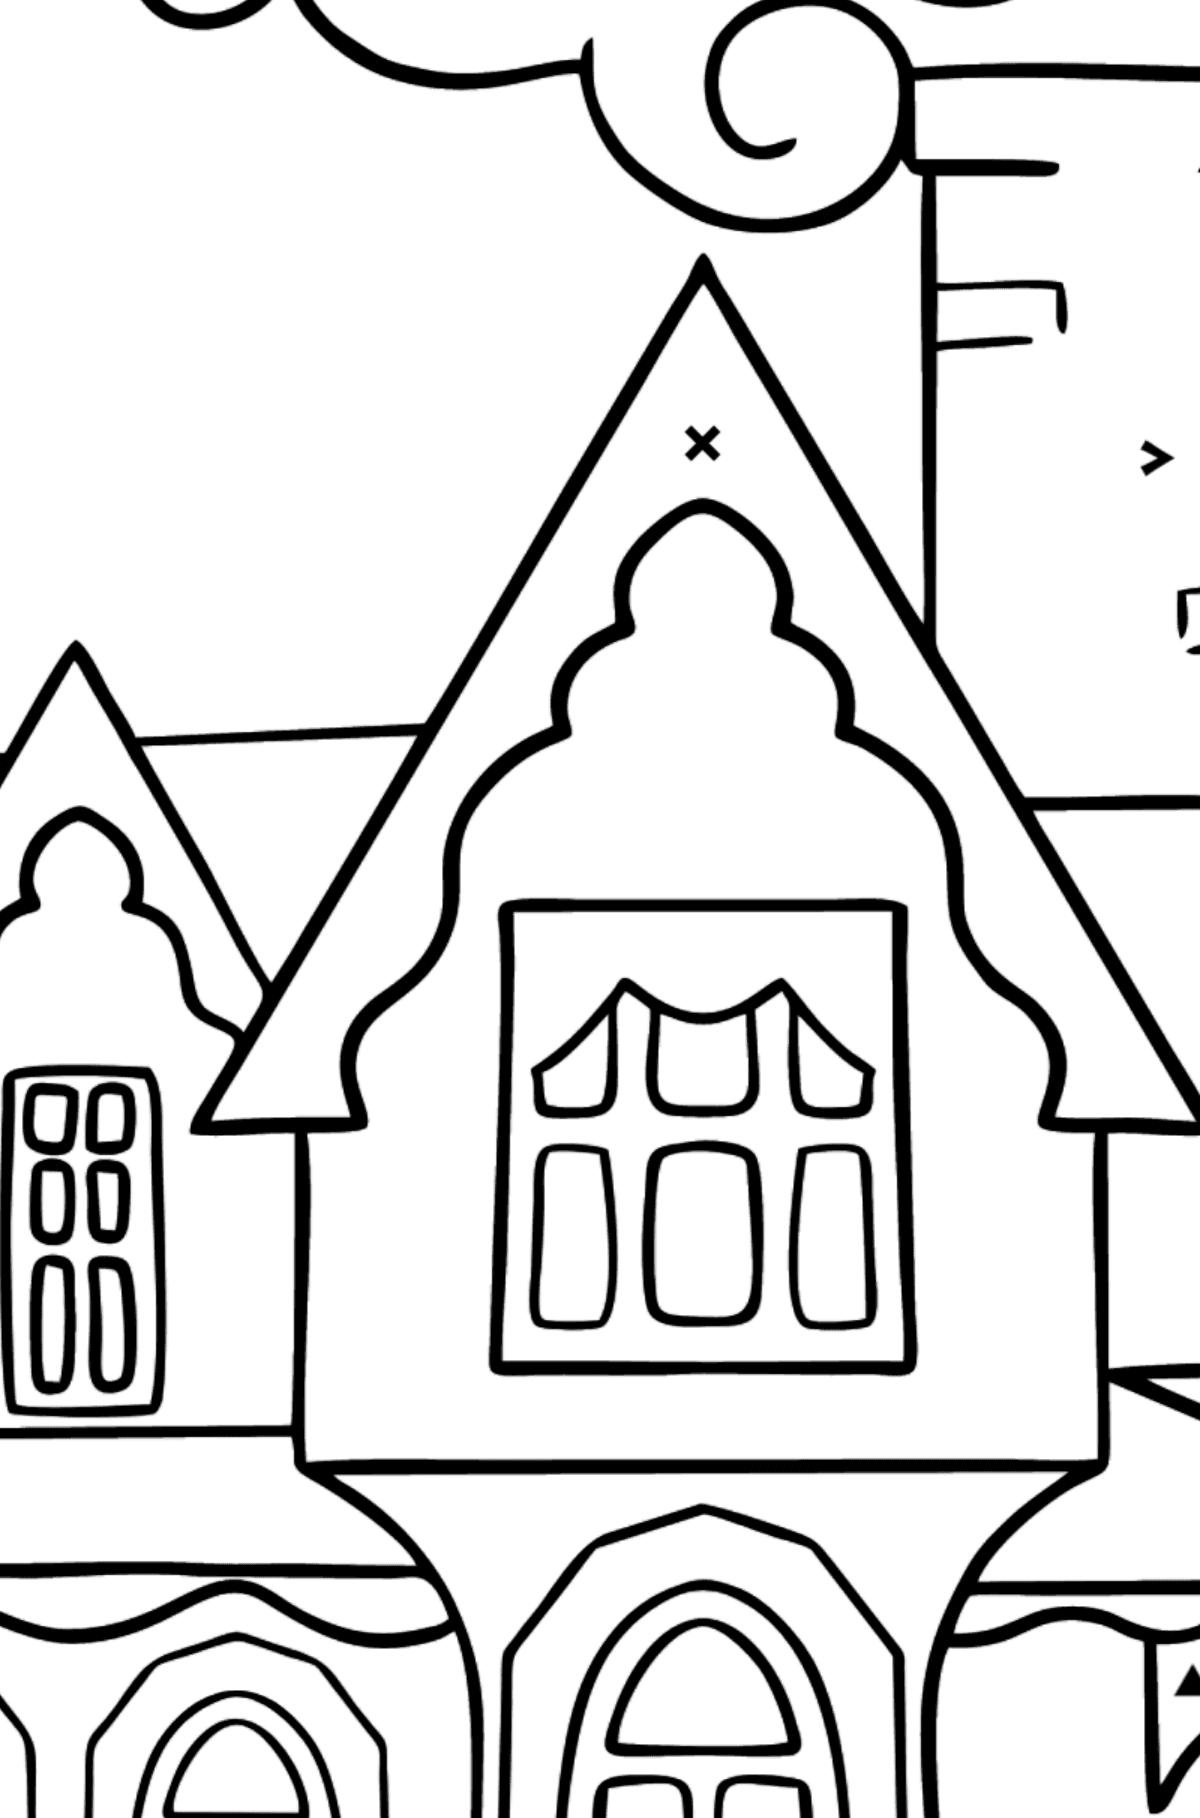 Simple Coloring Page - A Miraculous House - Coloring by Symbols for Kids